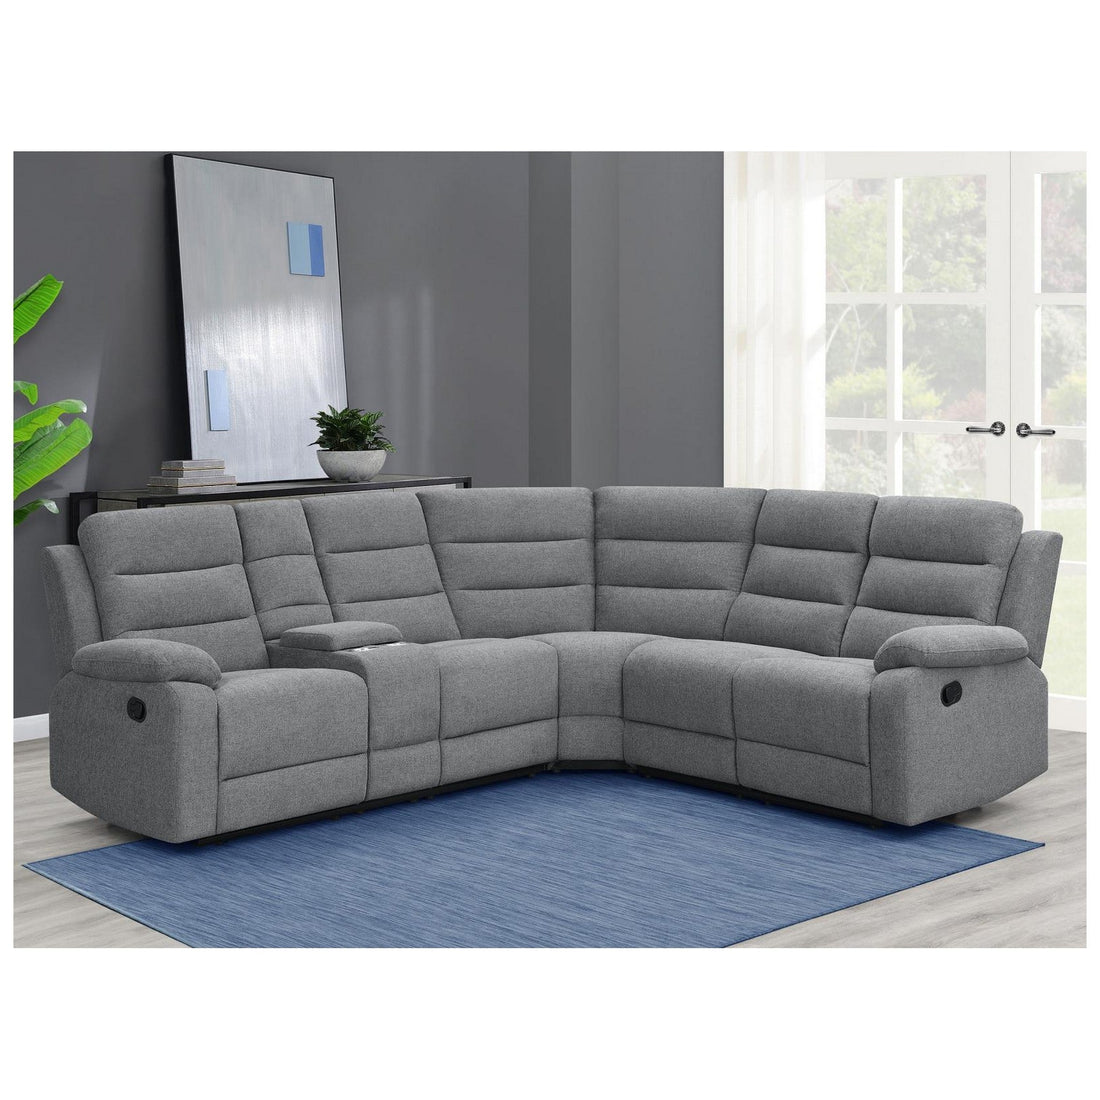 David 3-piece Upholstered Motion Sectional with Pillow Arms Smoke 609620